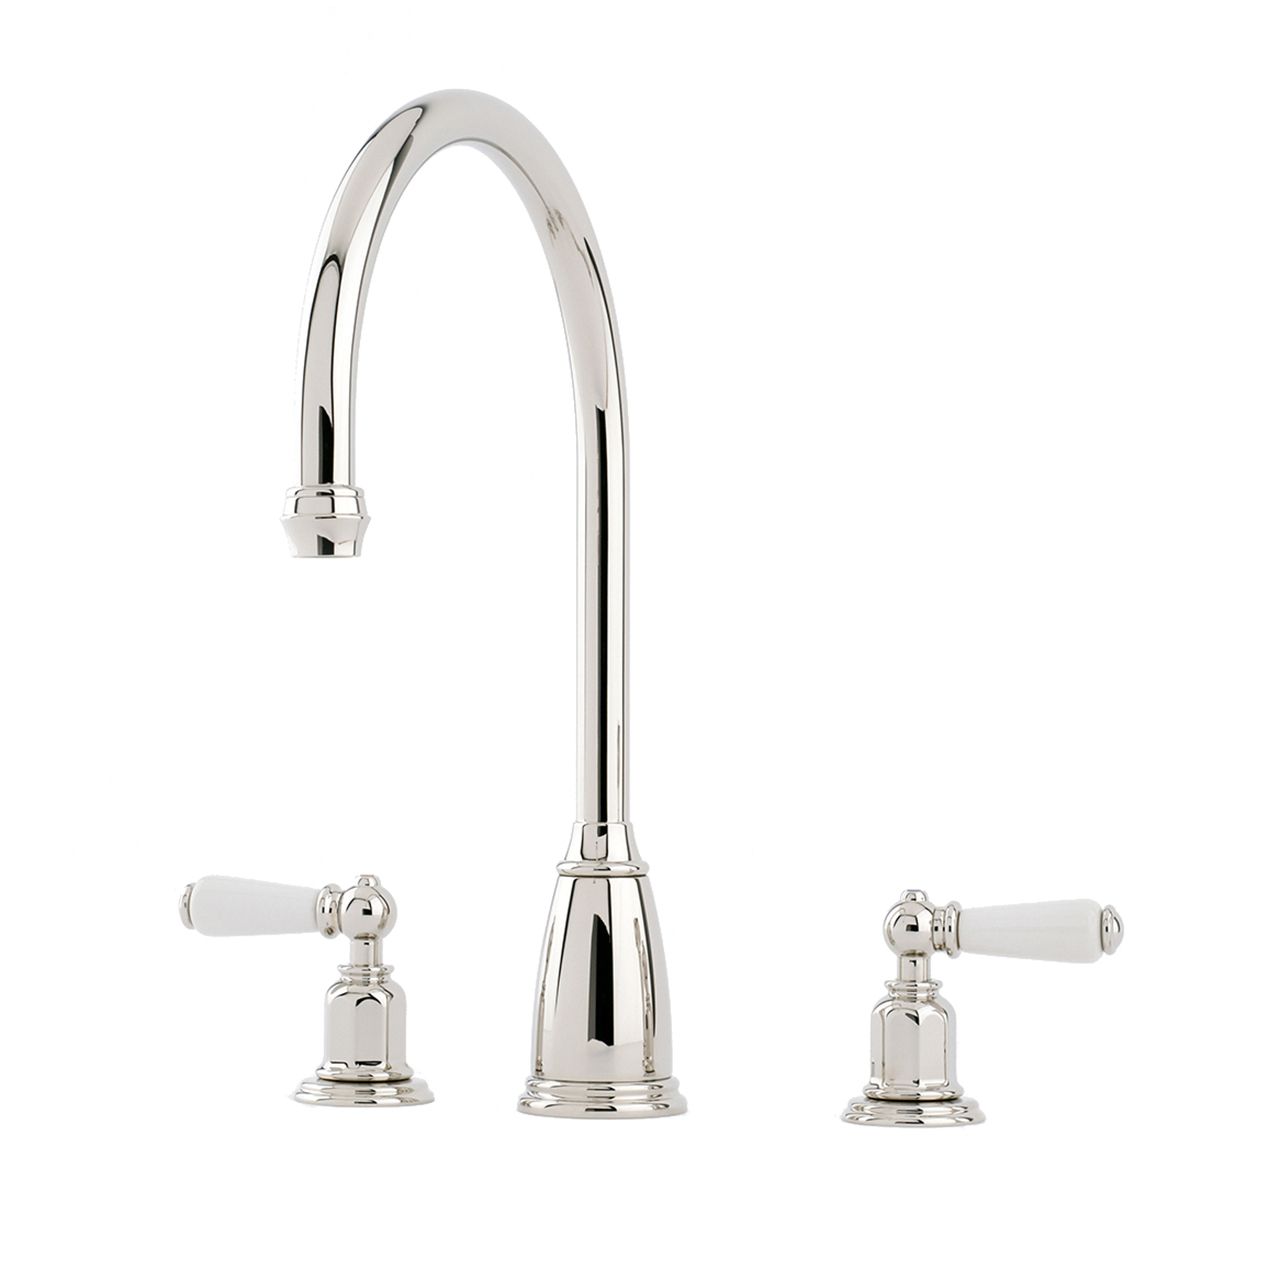 Phoenician Three Hole Mixer Tap with Porcelain Lever Handles – Perrin & Rowe